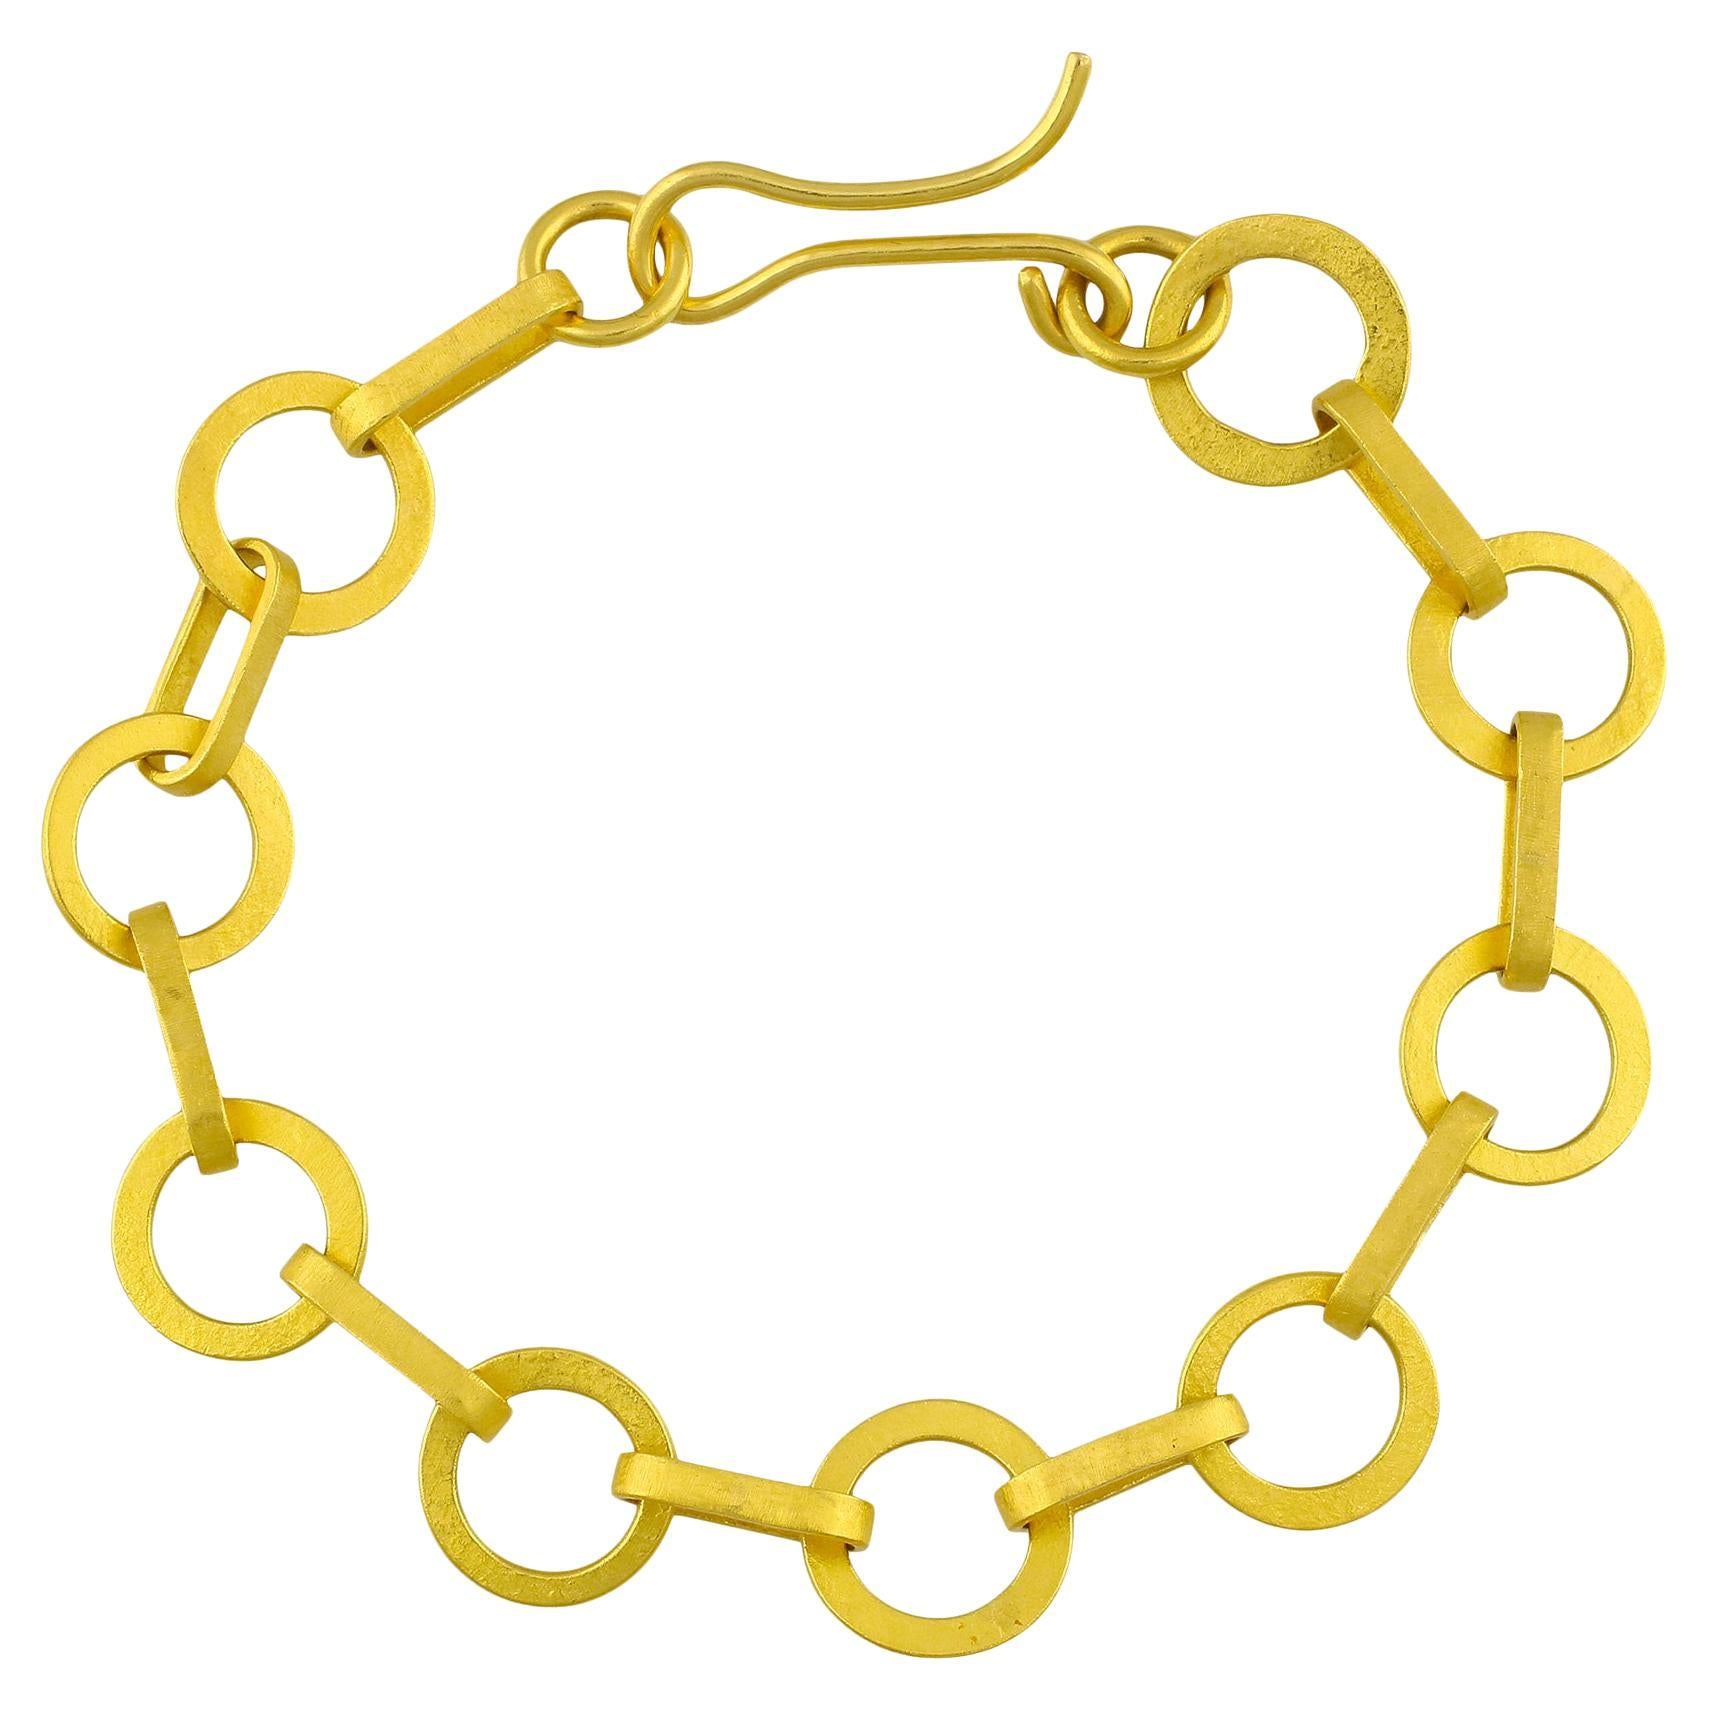 PHILIPPE SPENCER Solid 22K Gold Completely Hand-Forged Round Link Bracelet For Sale